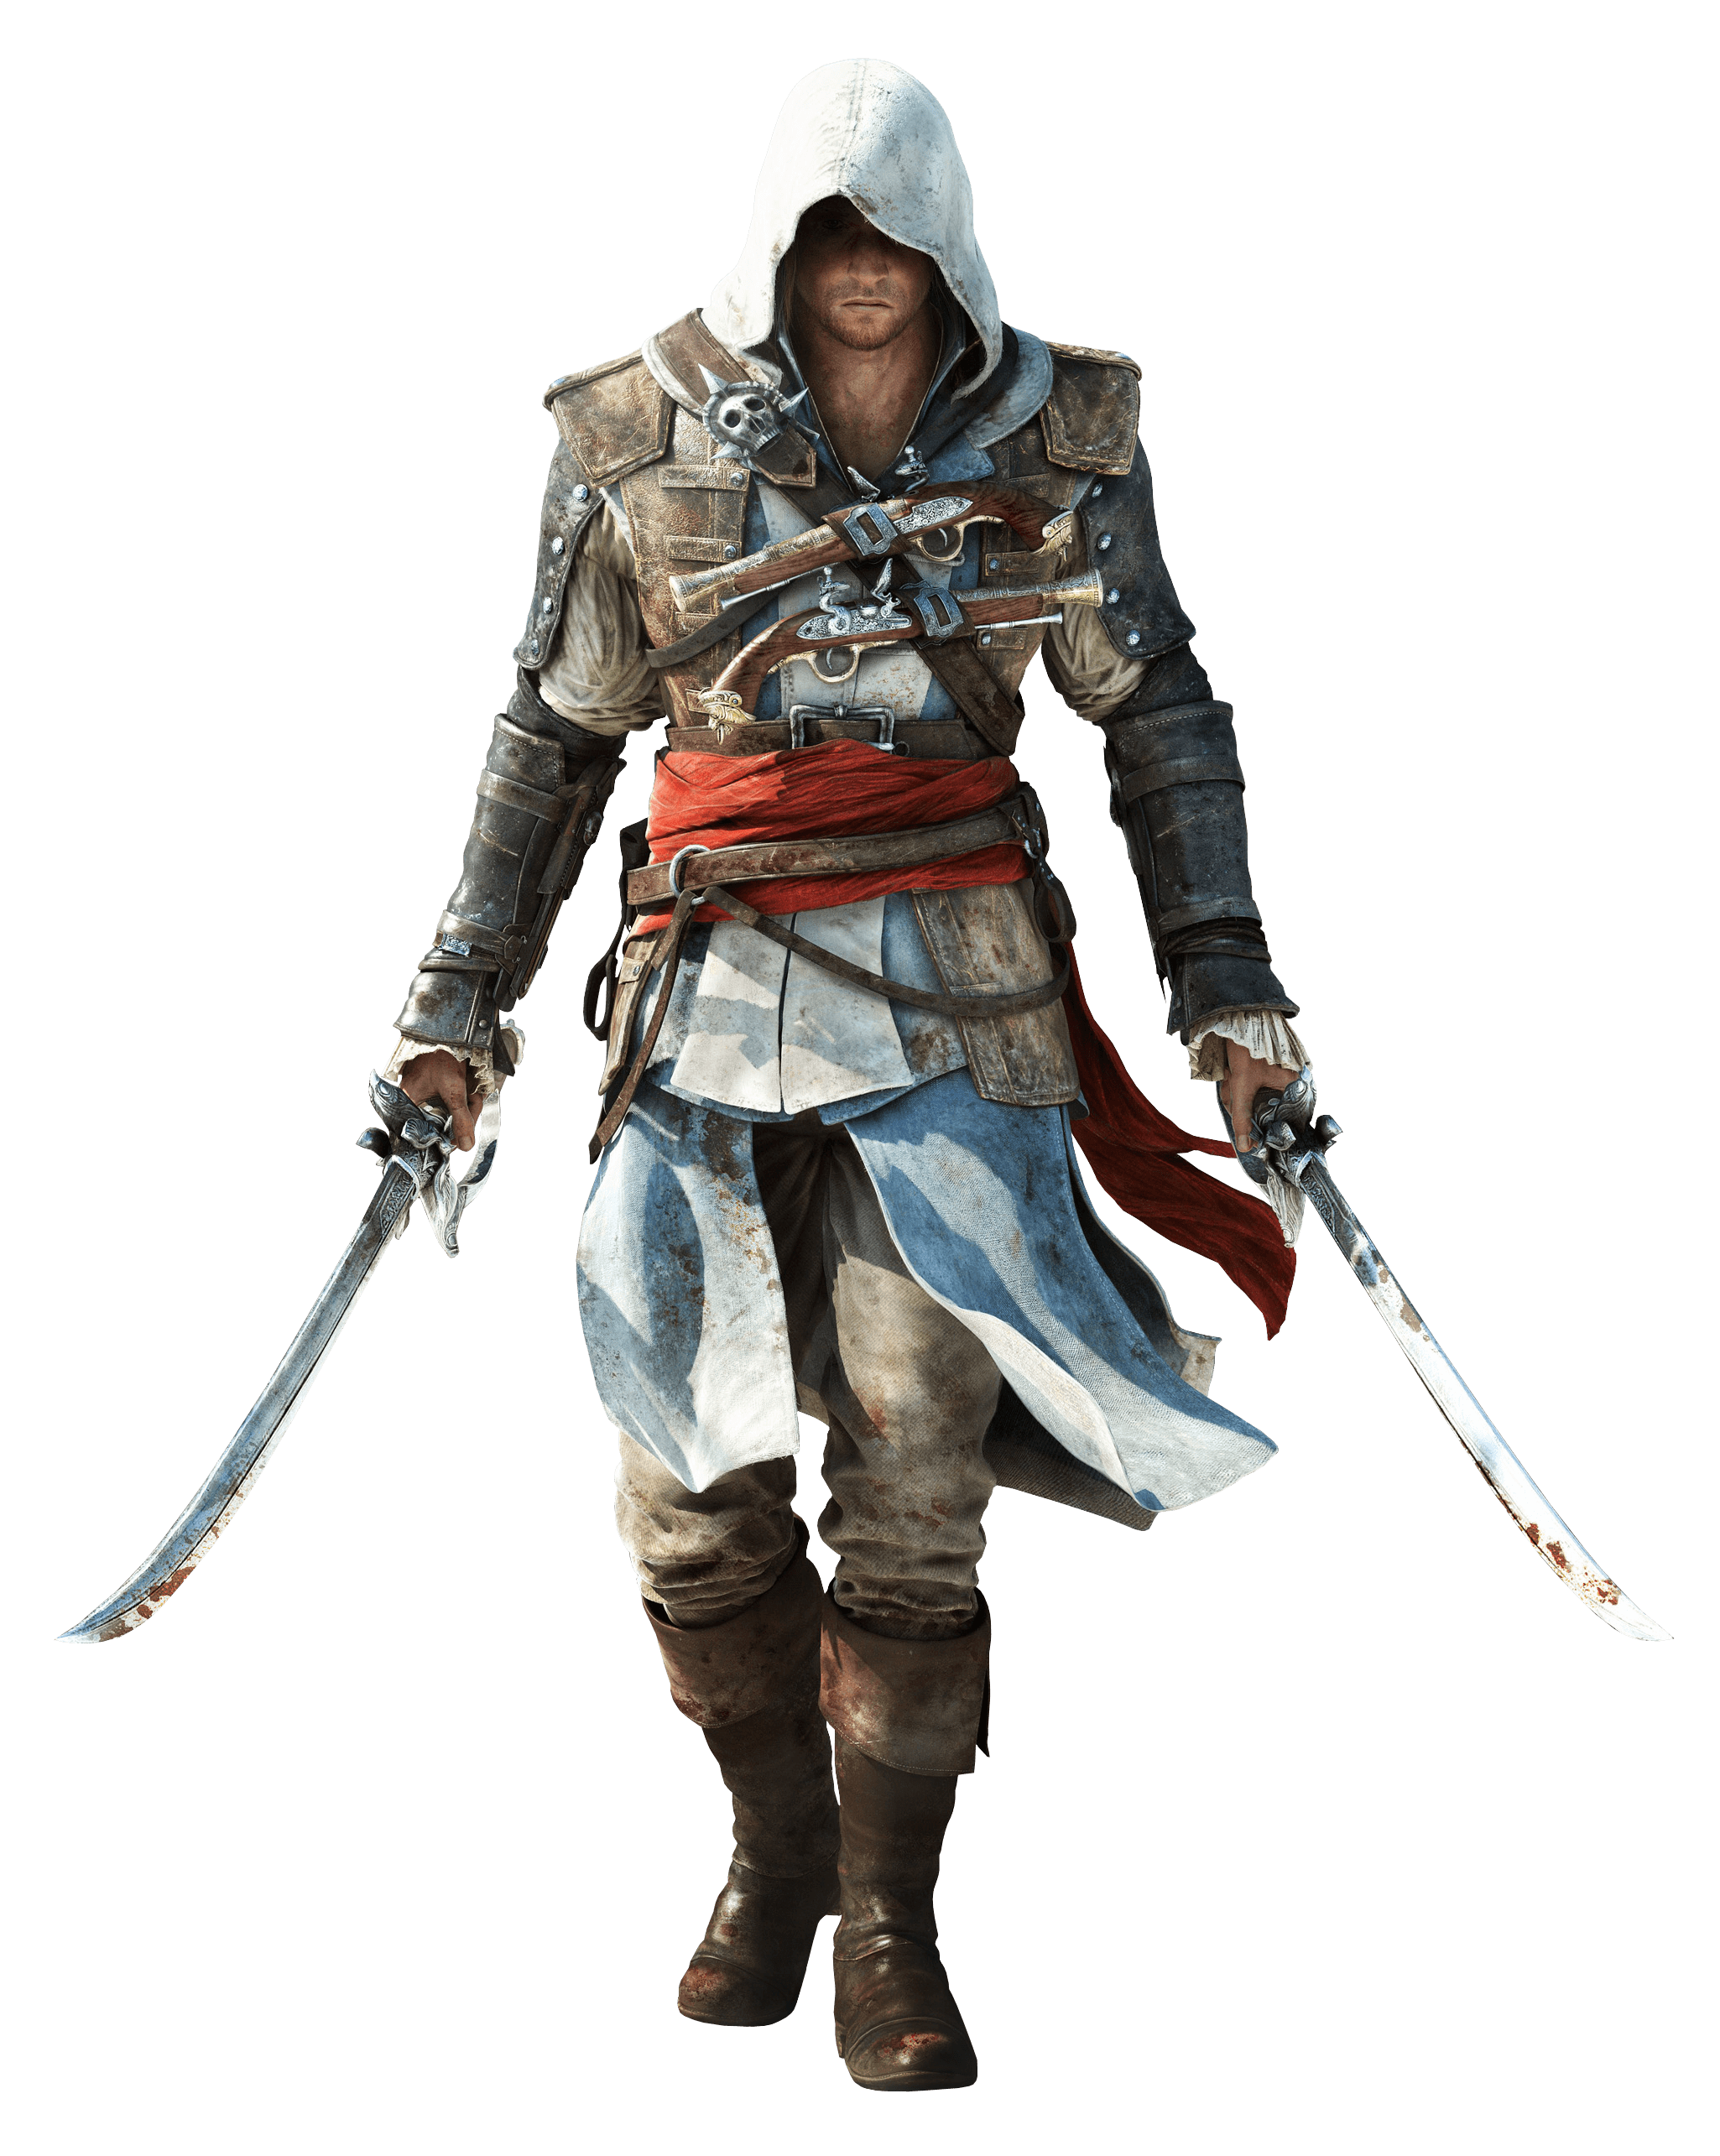 connor kenway - Google Search